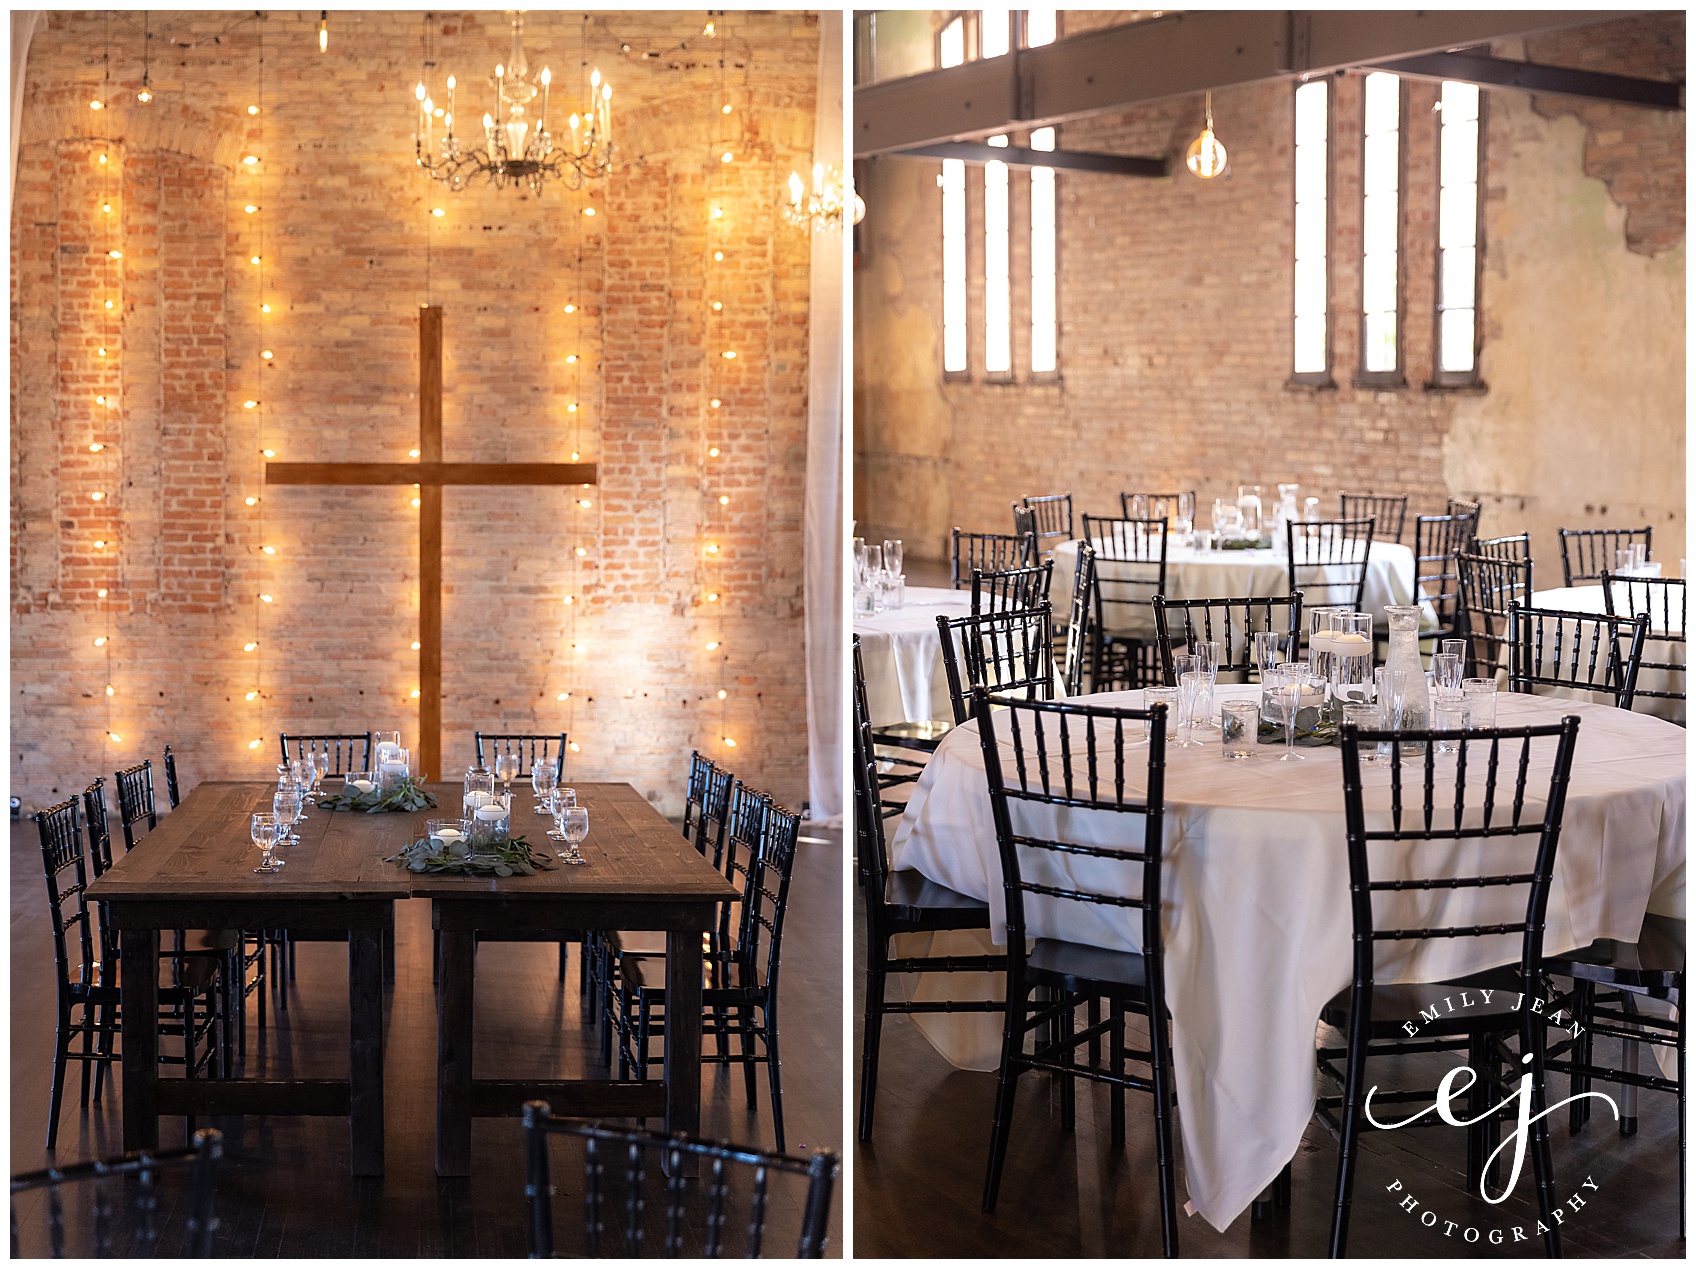 elegant rustic industrial decorations and table centerpieces